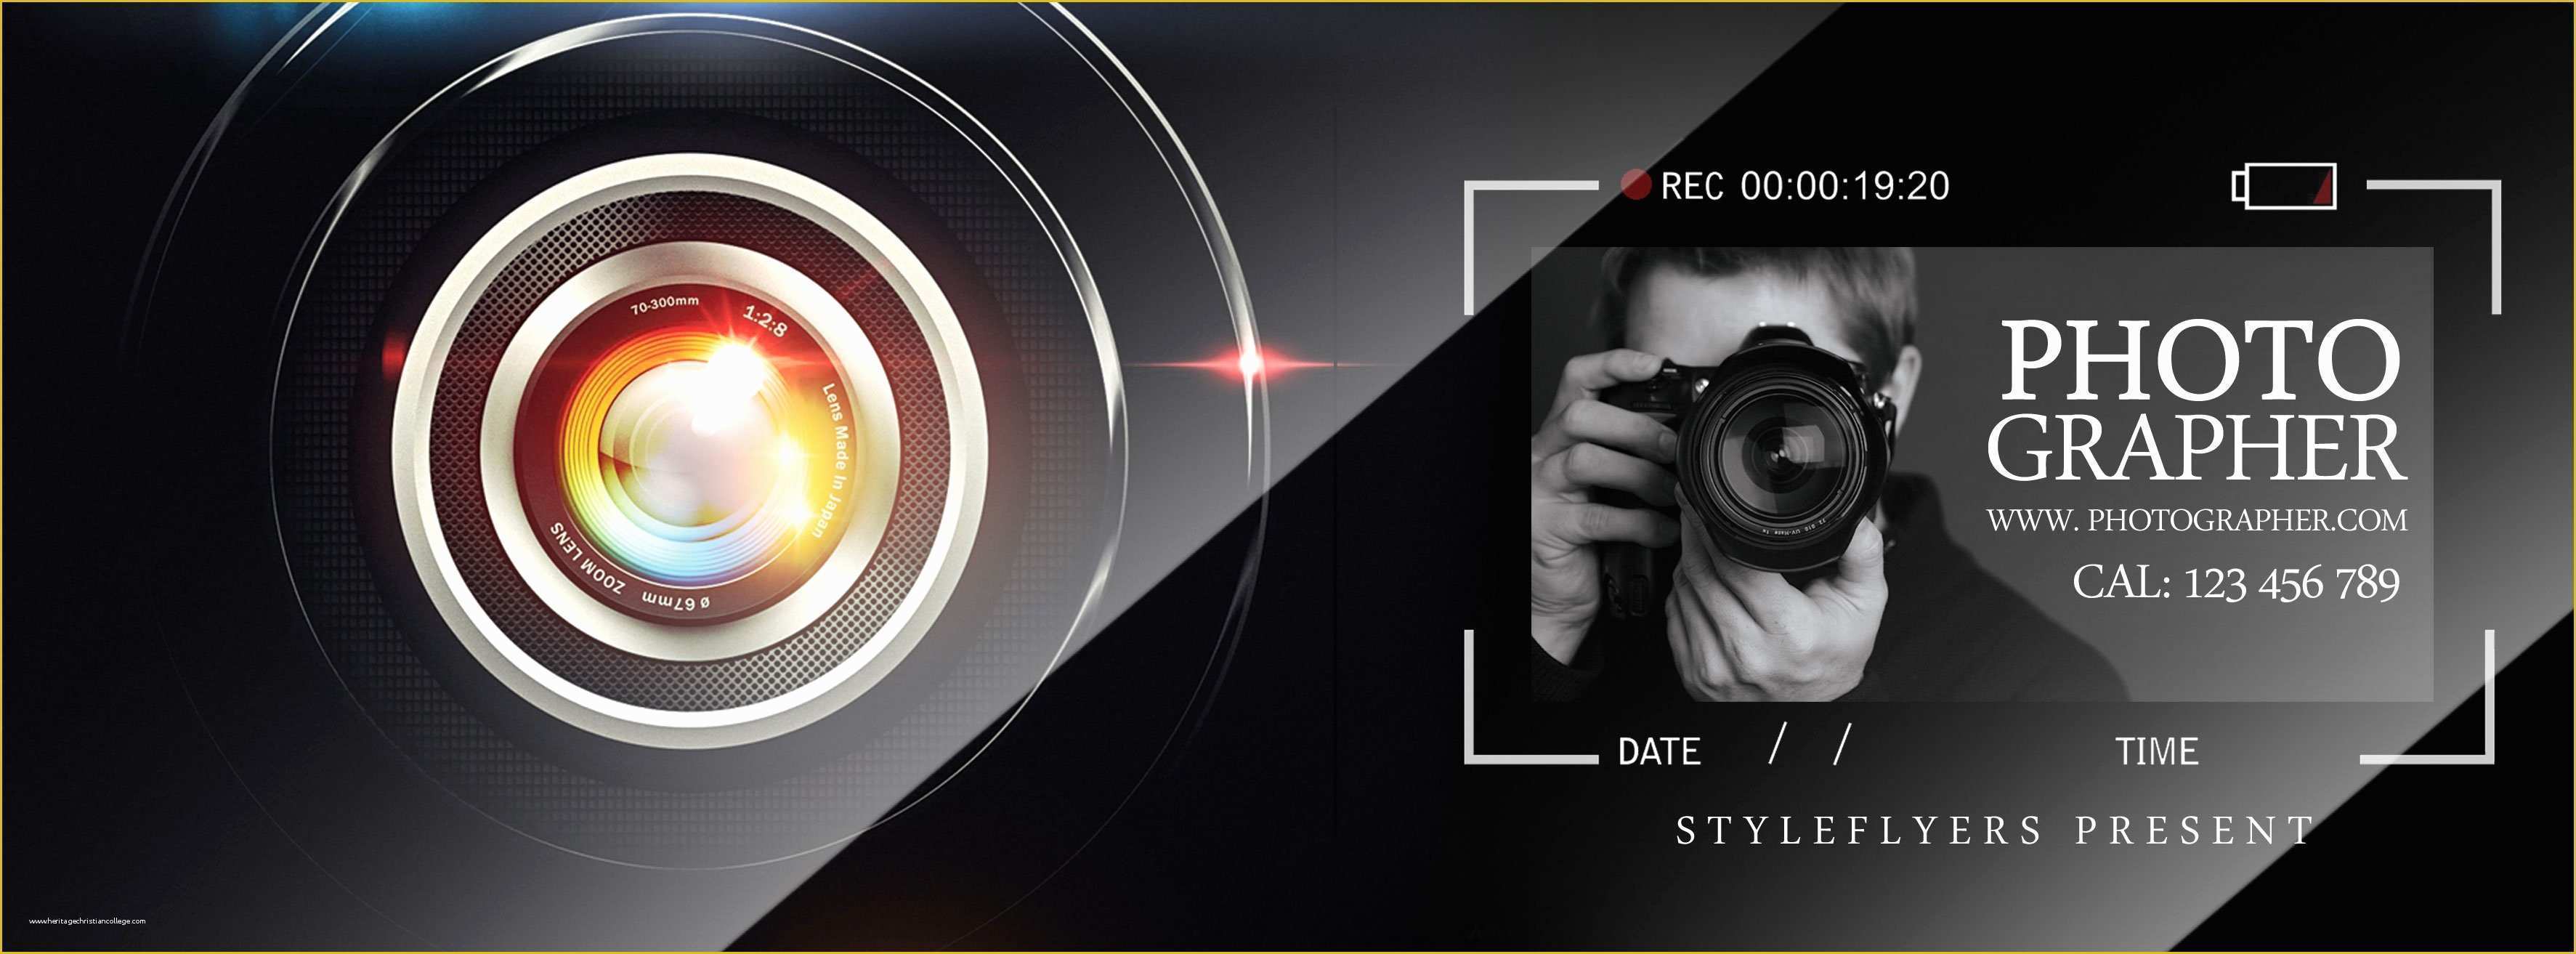 Free Psd Templates for Photographers Of Grapher Psd Flyer Template 6004 Styleflyers